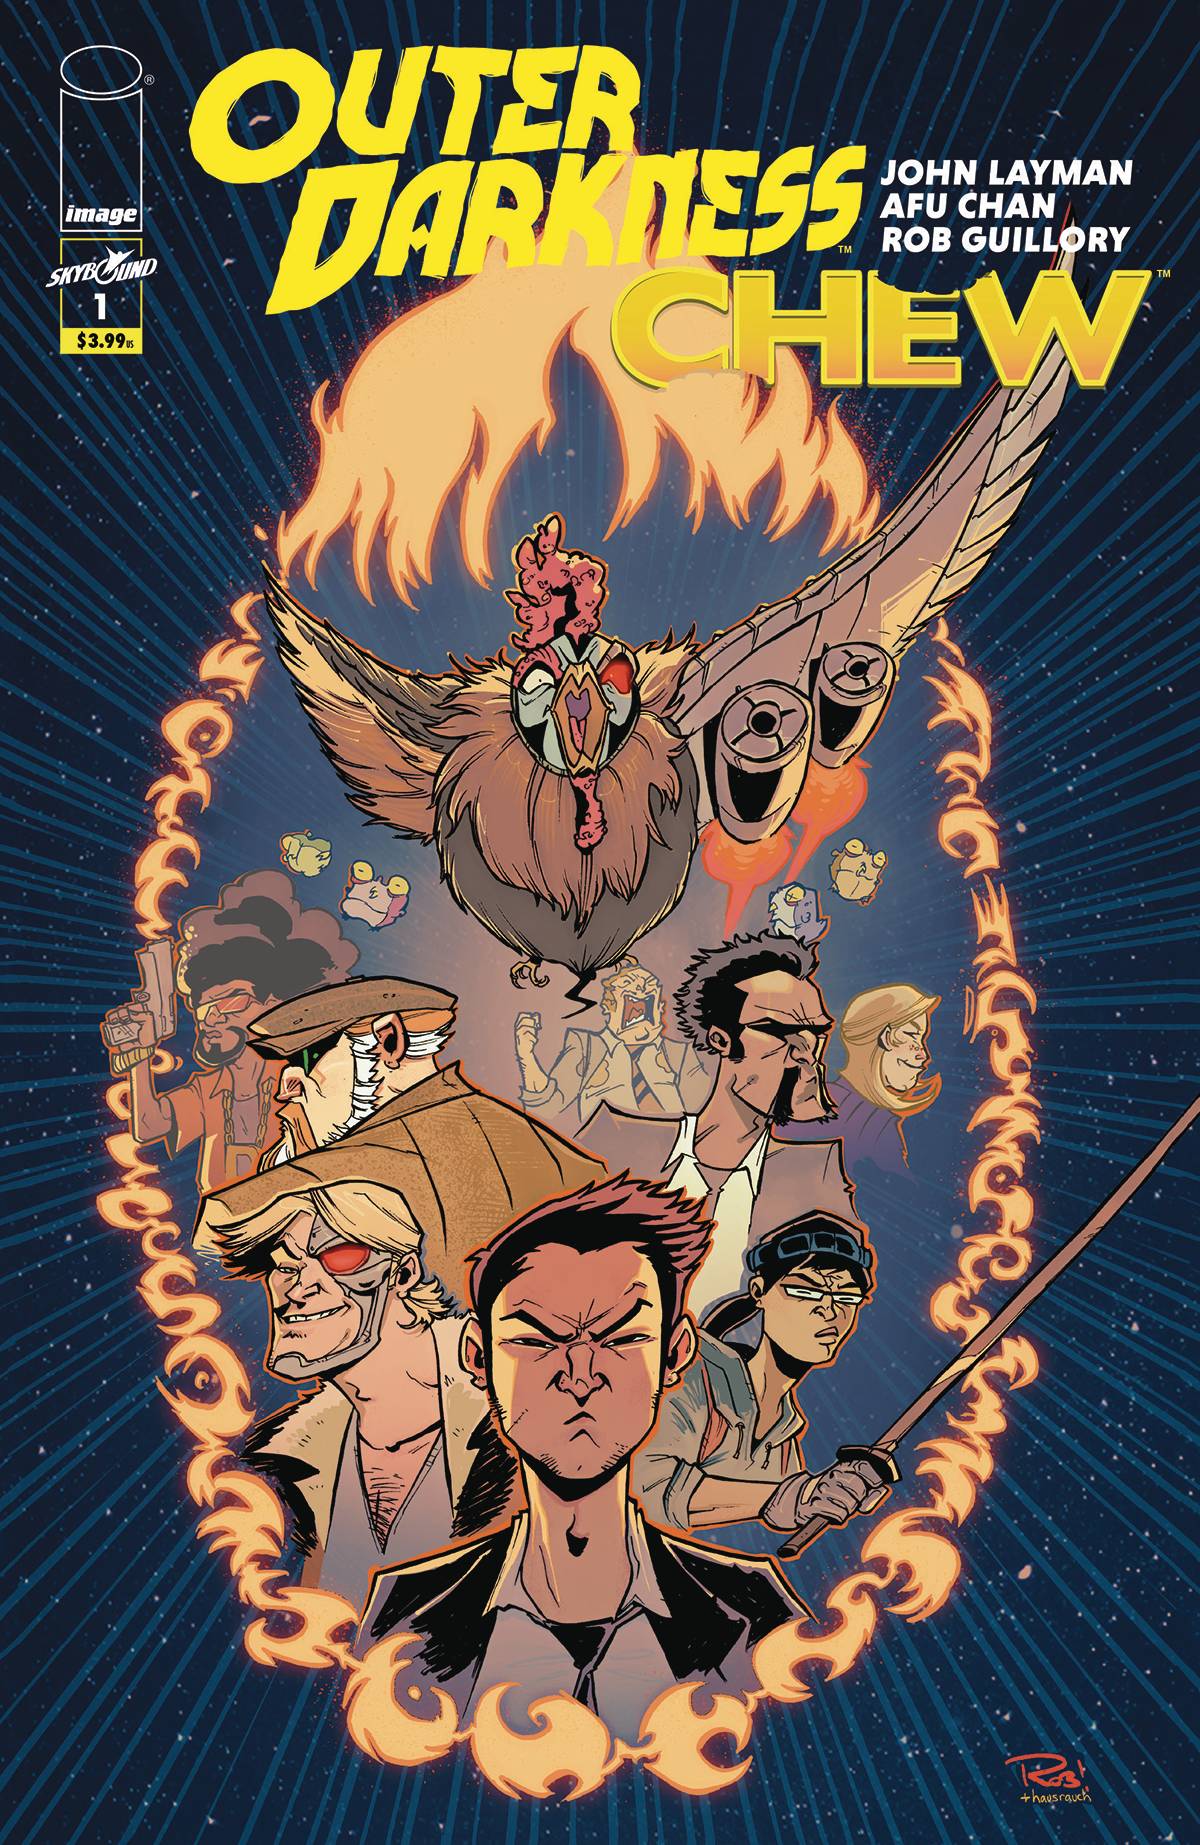 OUTER DARKNESS CHEW #1 (OF 3) CVR B GUILLORY (MR)